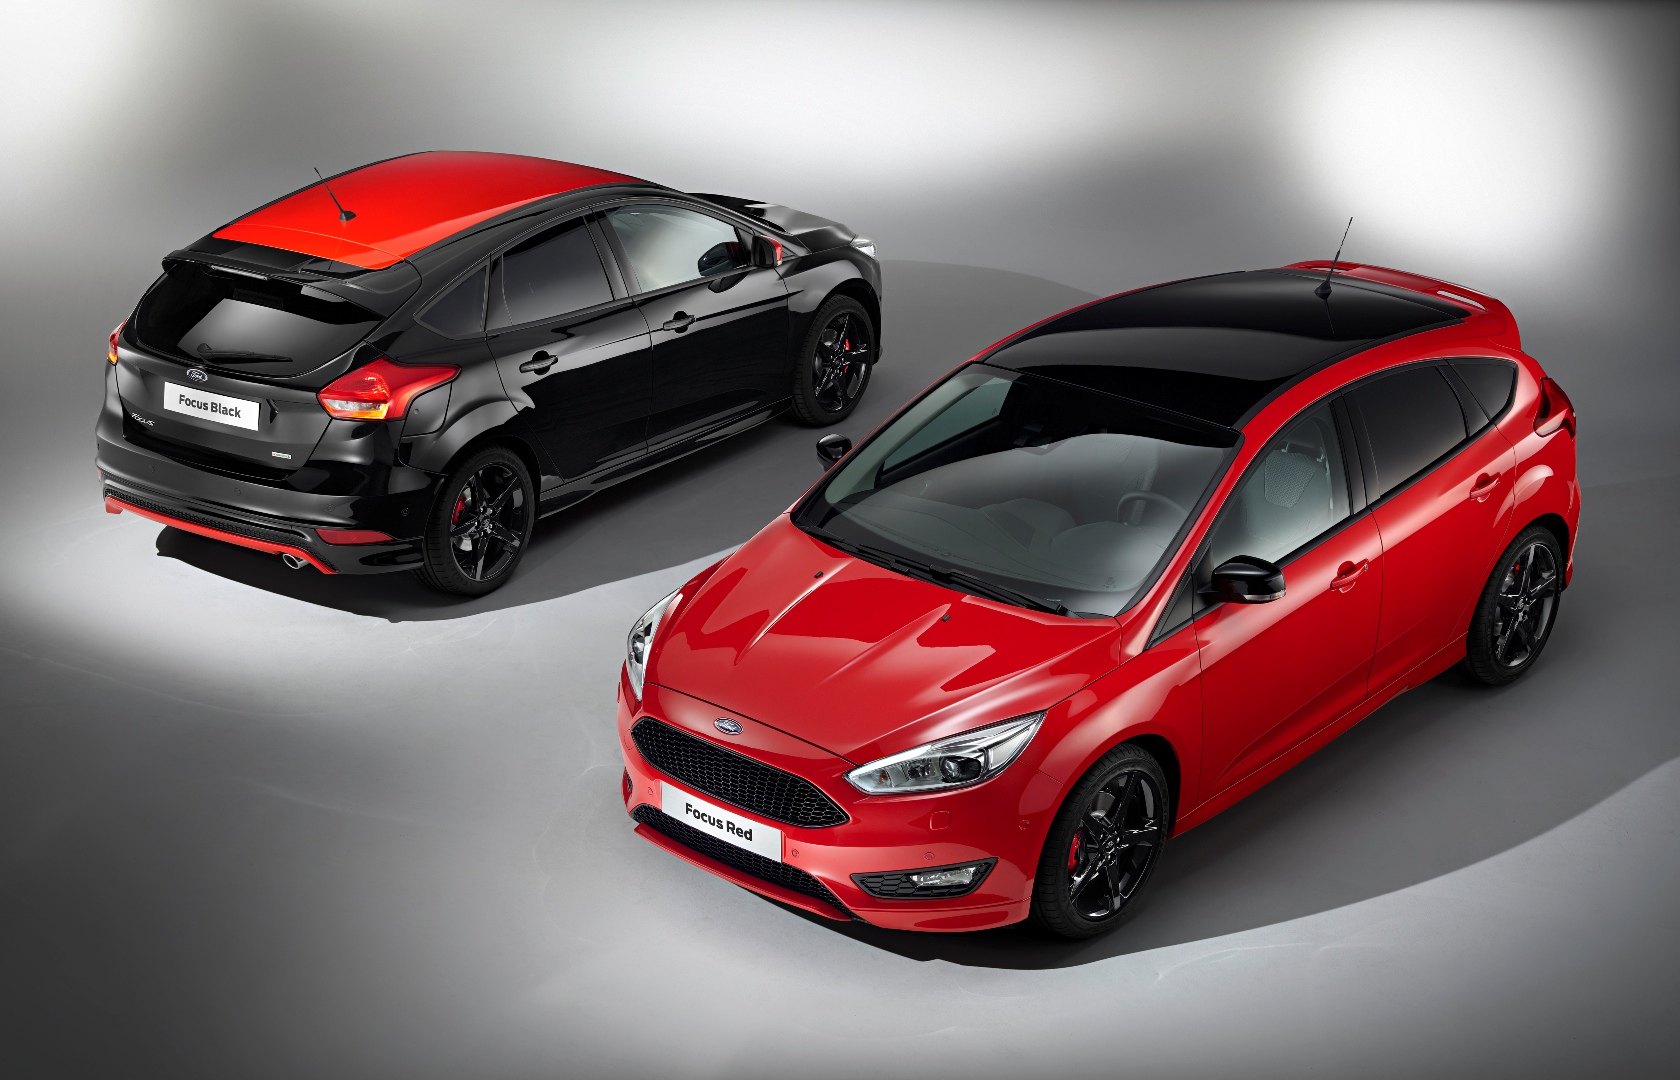 Ford Focus Zetec S Red and Black editions